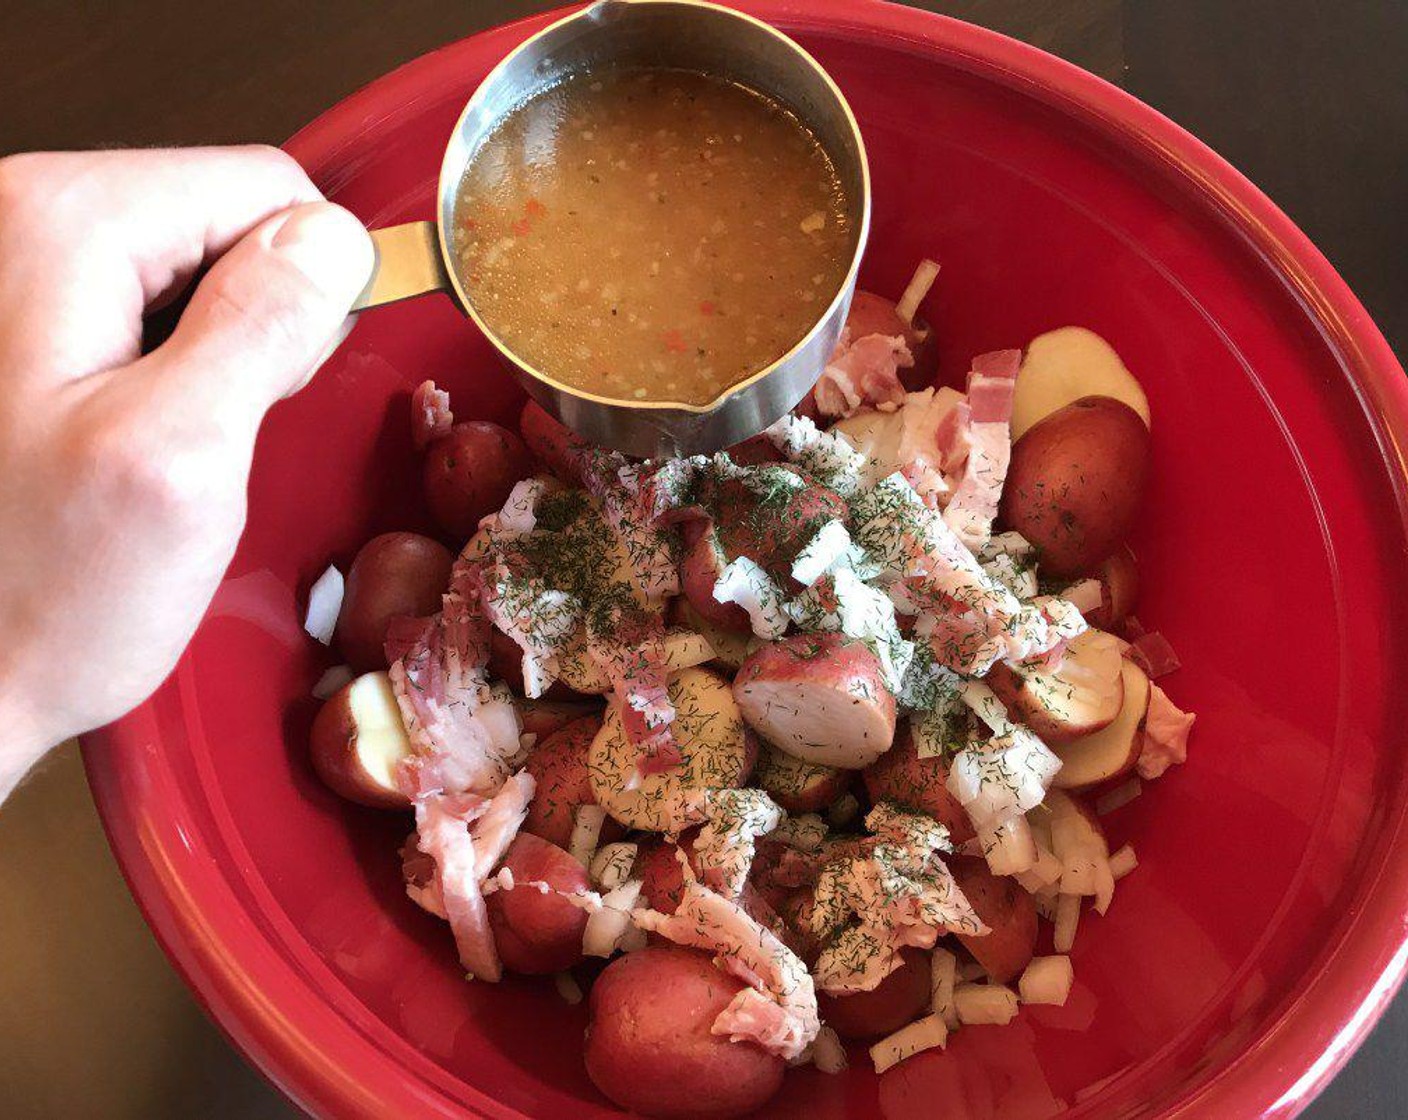 step 6 In a large bowl, combine potatoes, Onion (2/3 cup), bacon, Dried Dill Weed (1/2 tsp) and Ground Black Pepper (1/4 tsp). Pour Italian Dressing (2/3 cup) on top. Mix until the potatoes are evenly coated with the dressing.